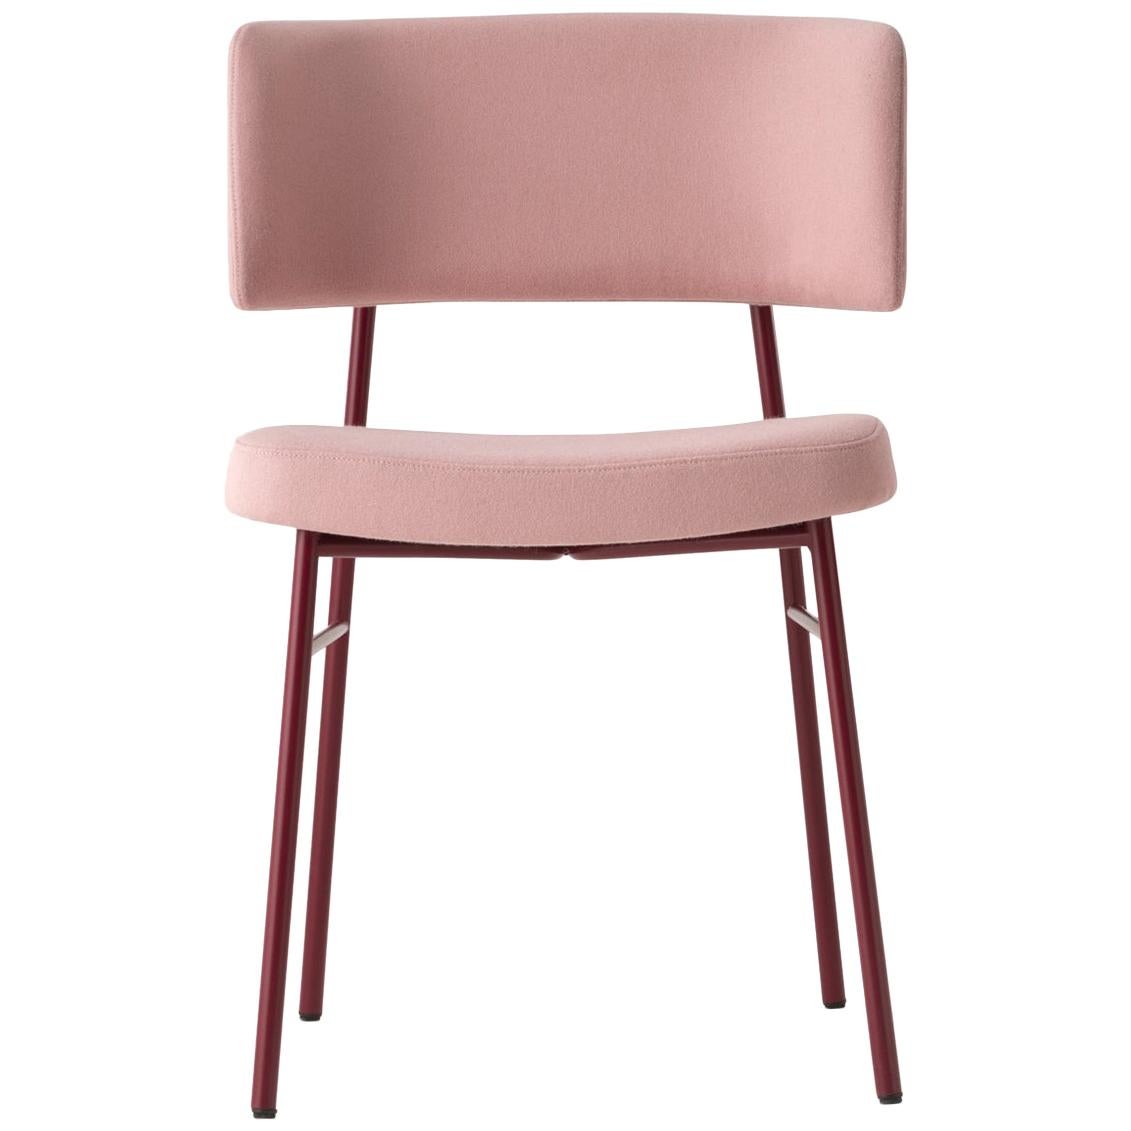 Marlen Chair, pink, indoor, chair, made in italy, home, contract